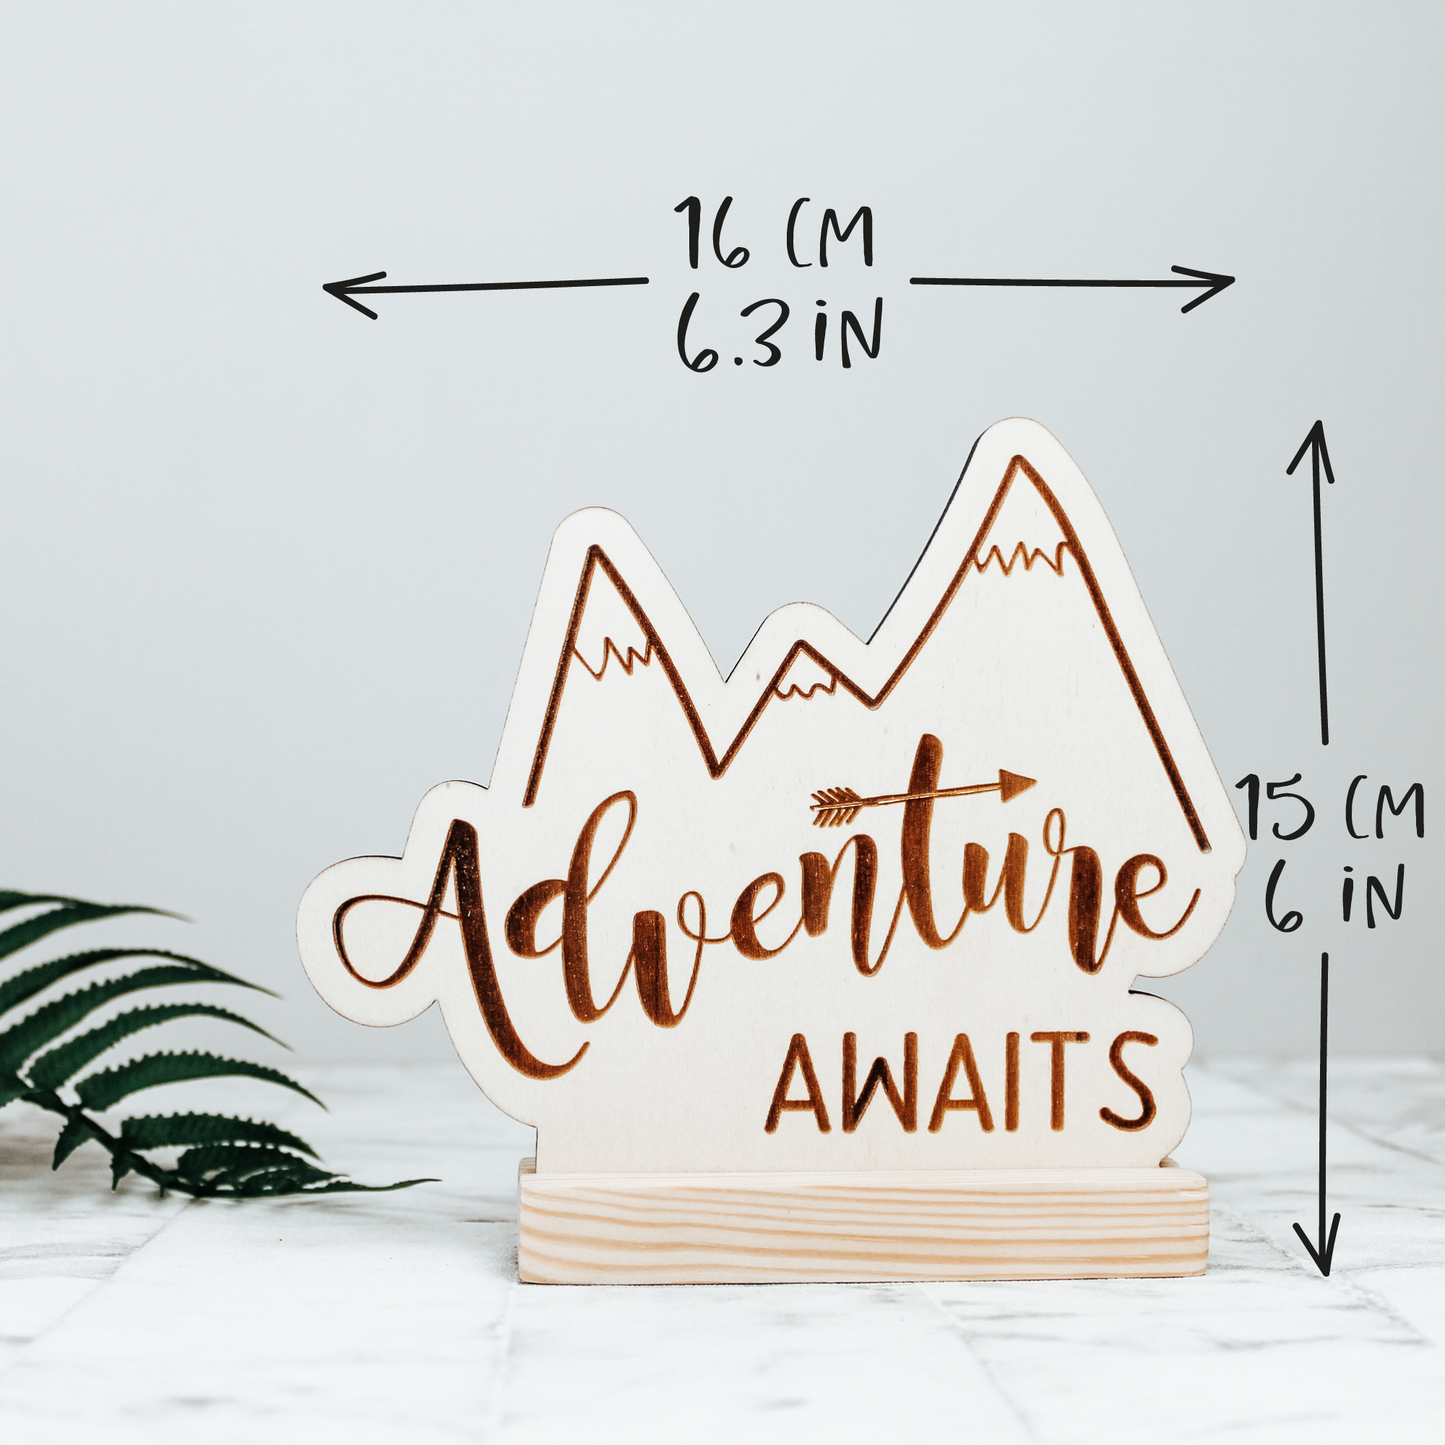 neutral colour wooden adventure awaits sign with added measurements 16cm long and 15 cm high